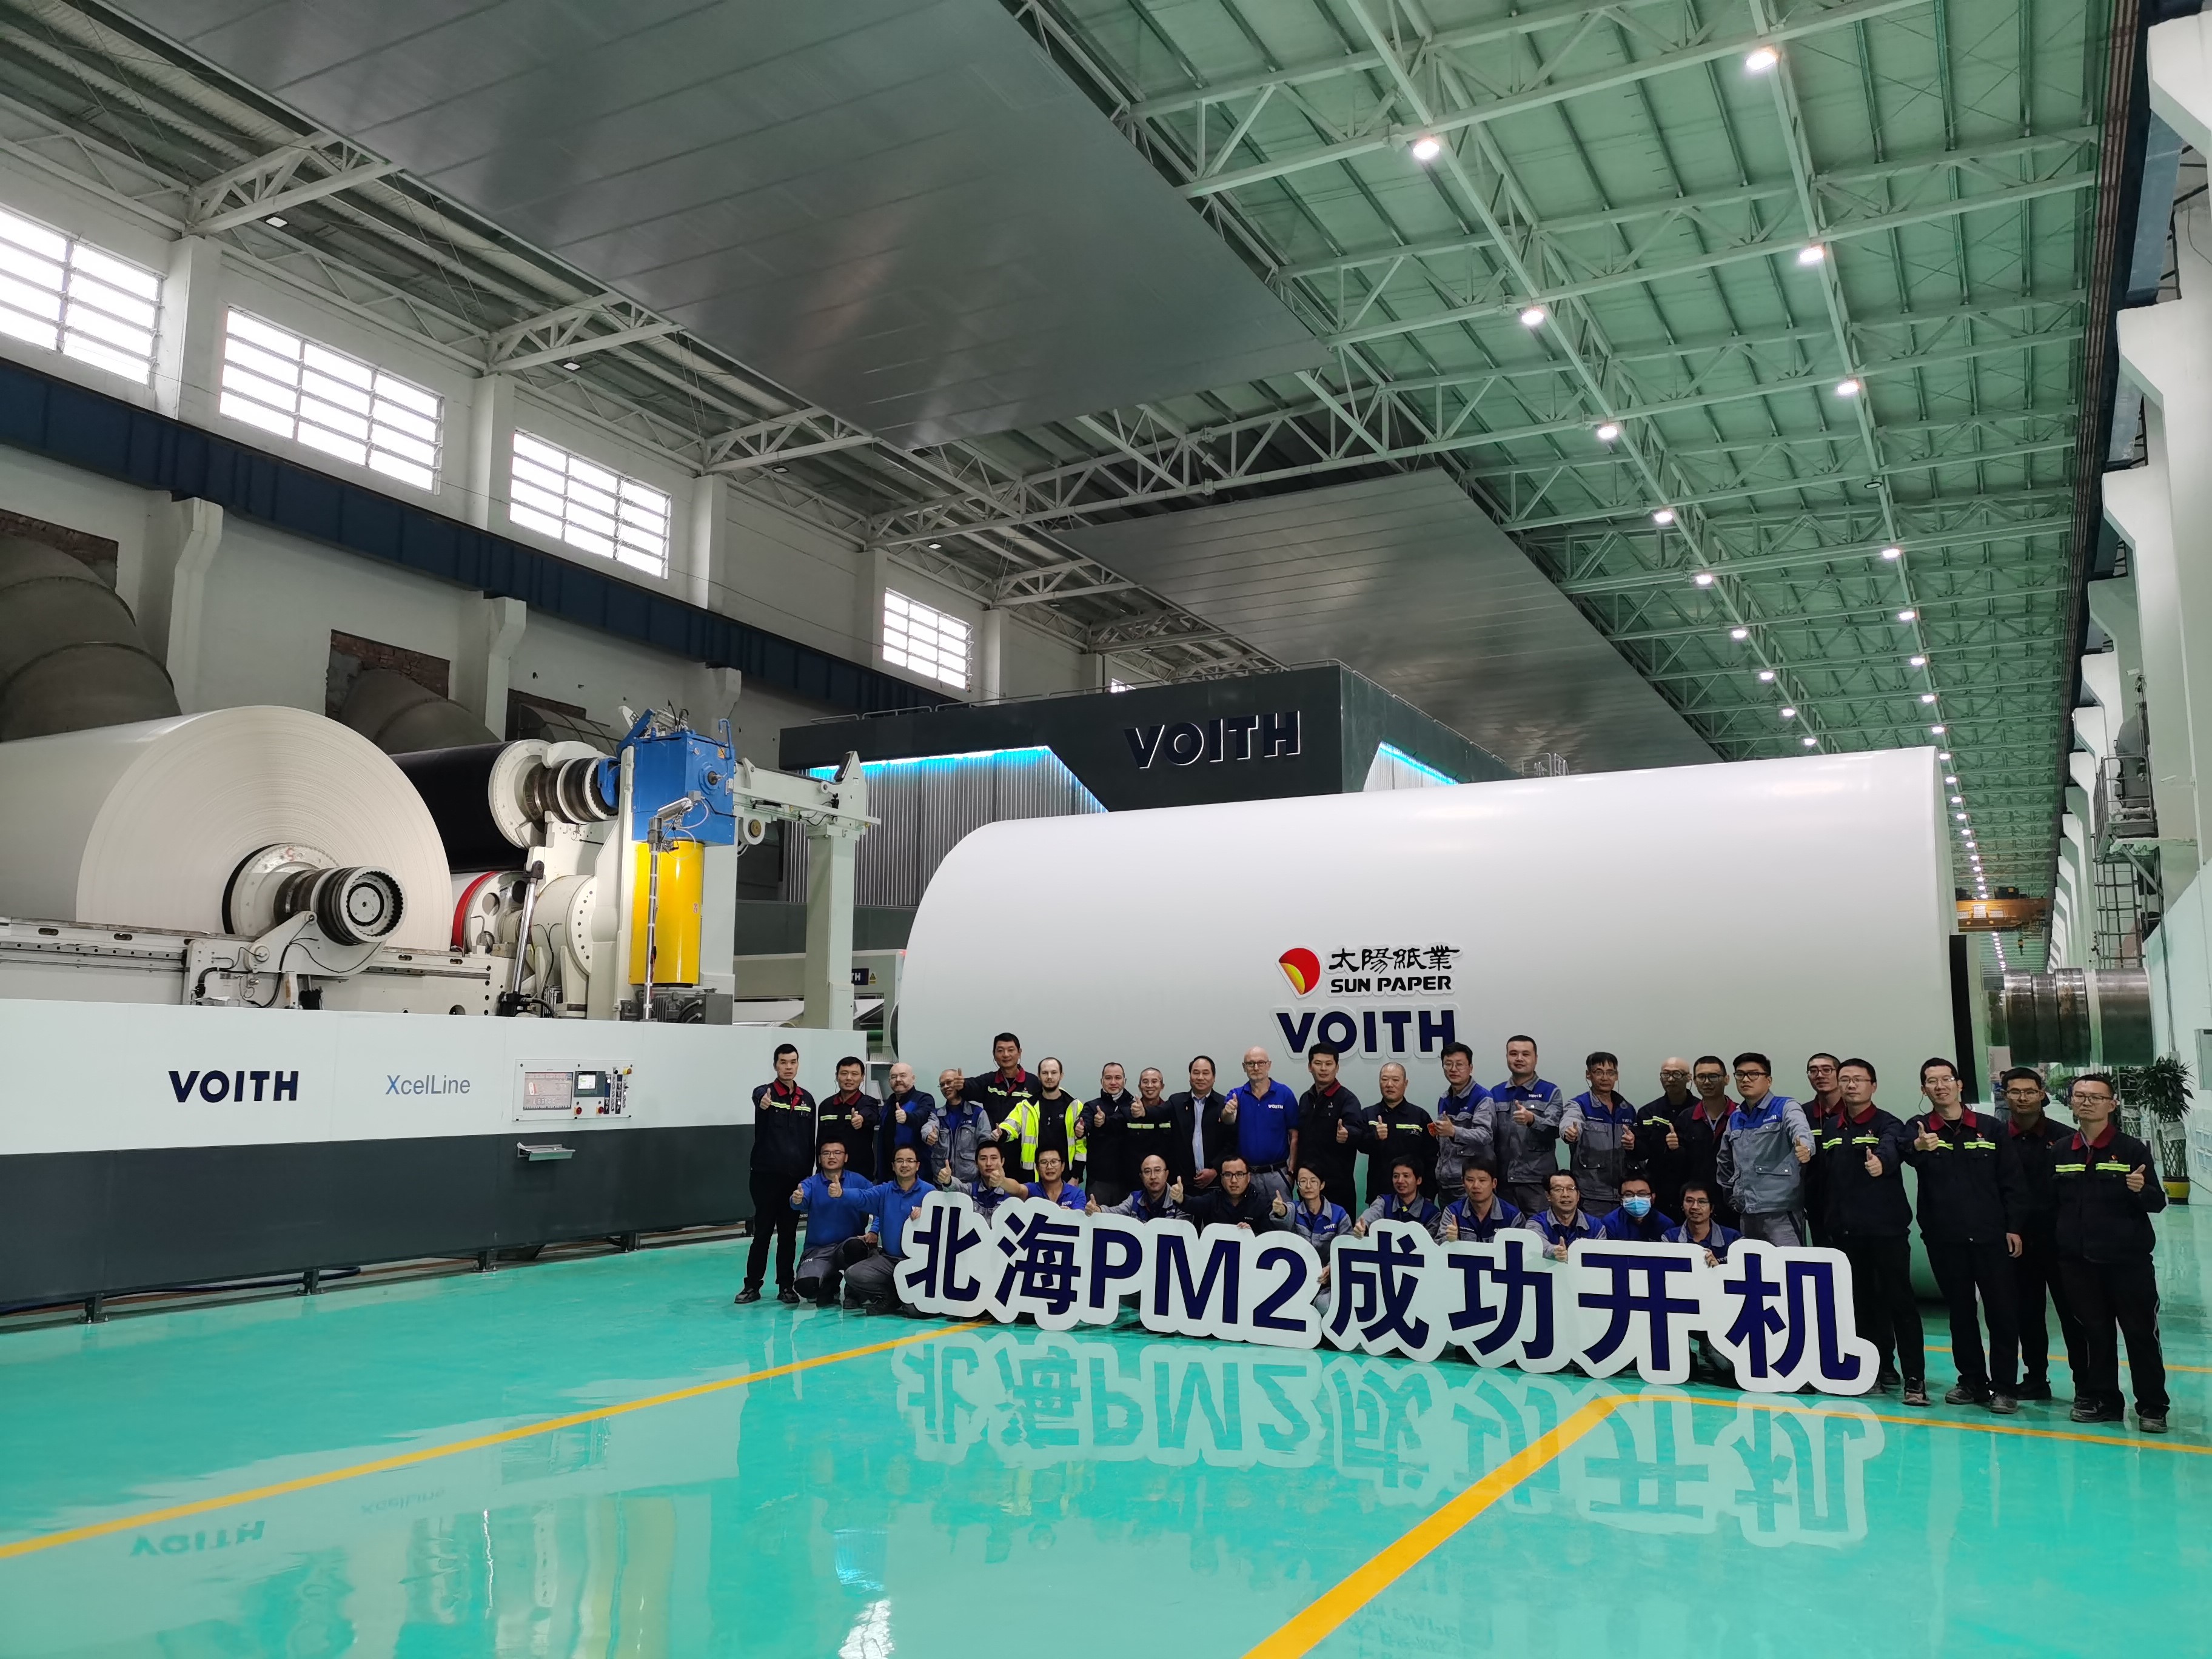 Voith and Sun Paper were able to start up the state-of-the-art facility at the Beihai site in record time.